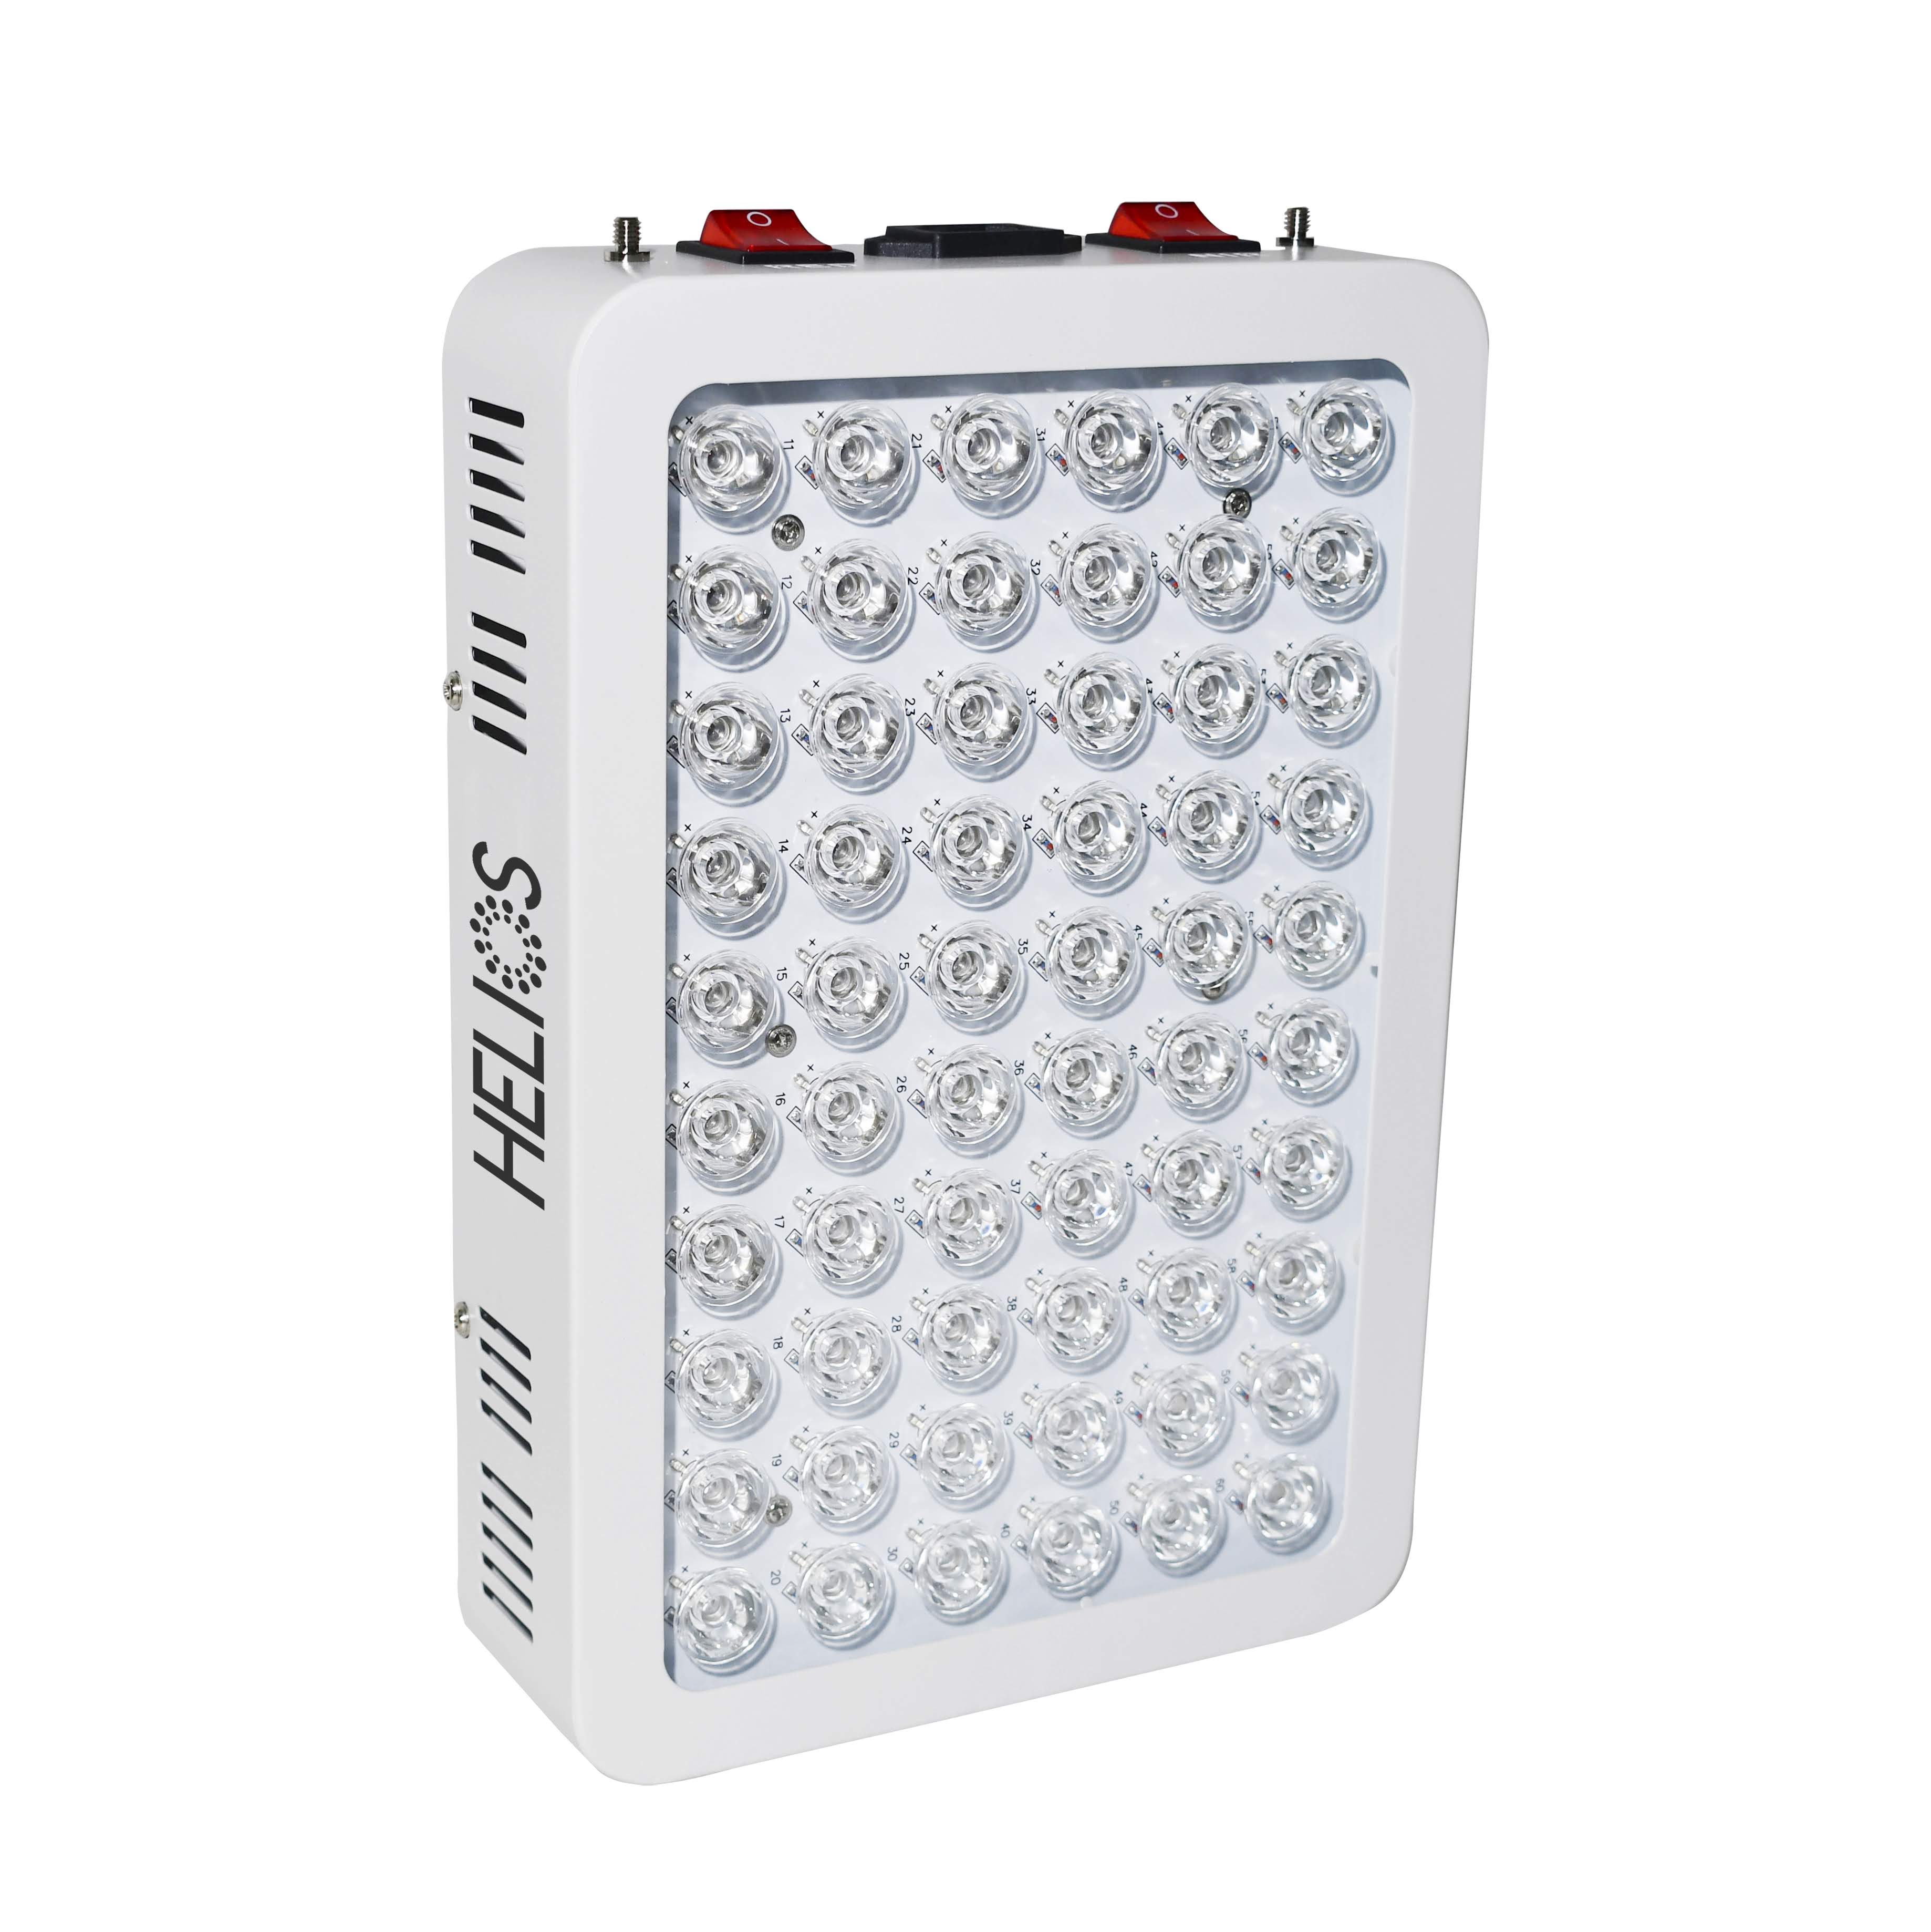 Helios 1 Series - 300w Targeted Red Light Therapy Device